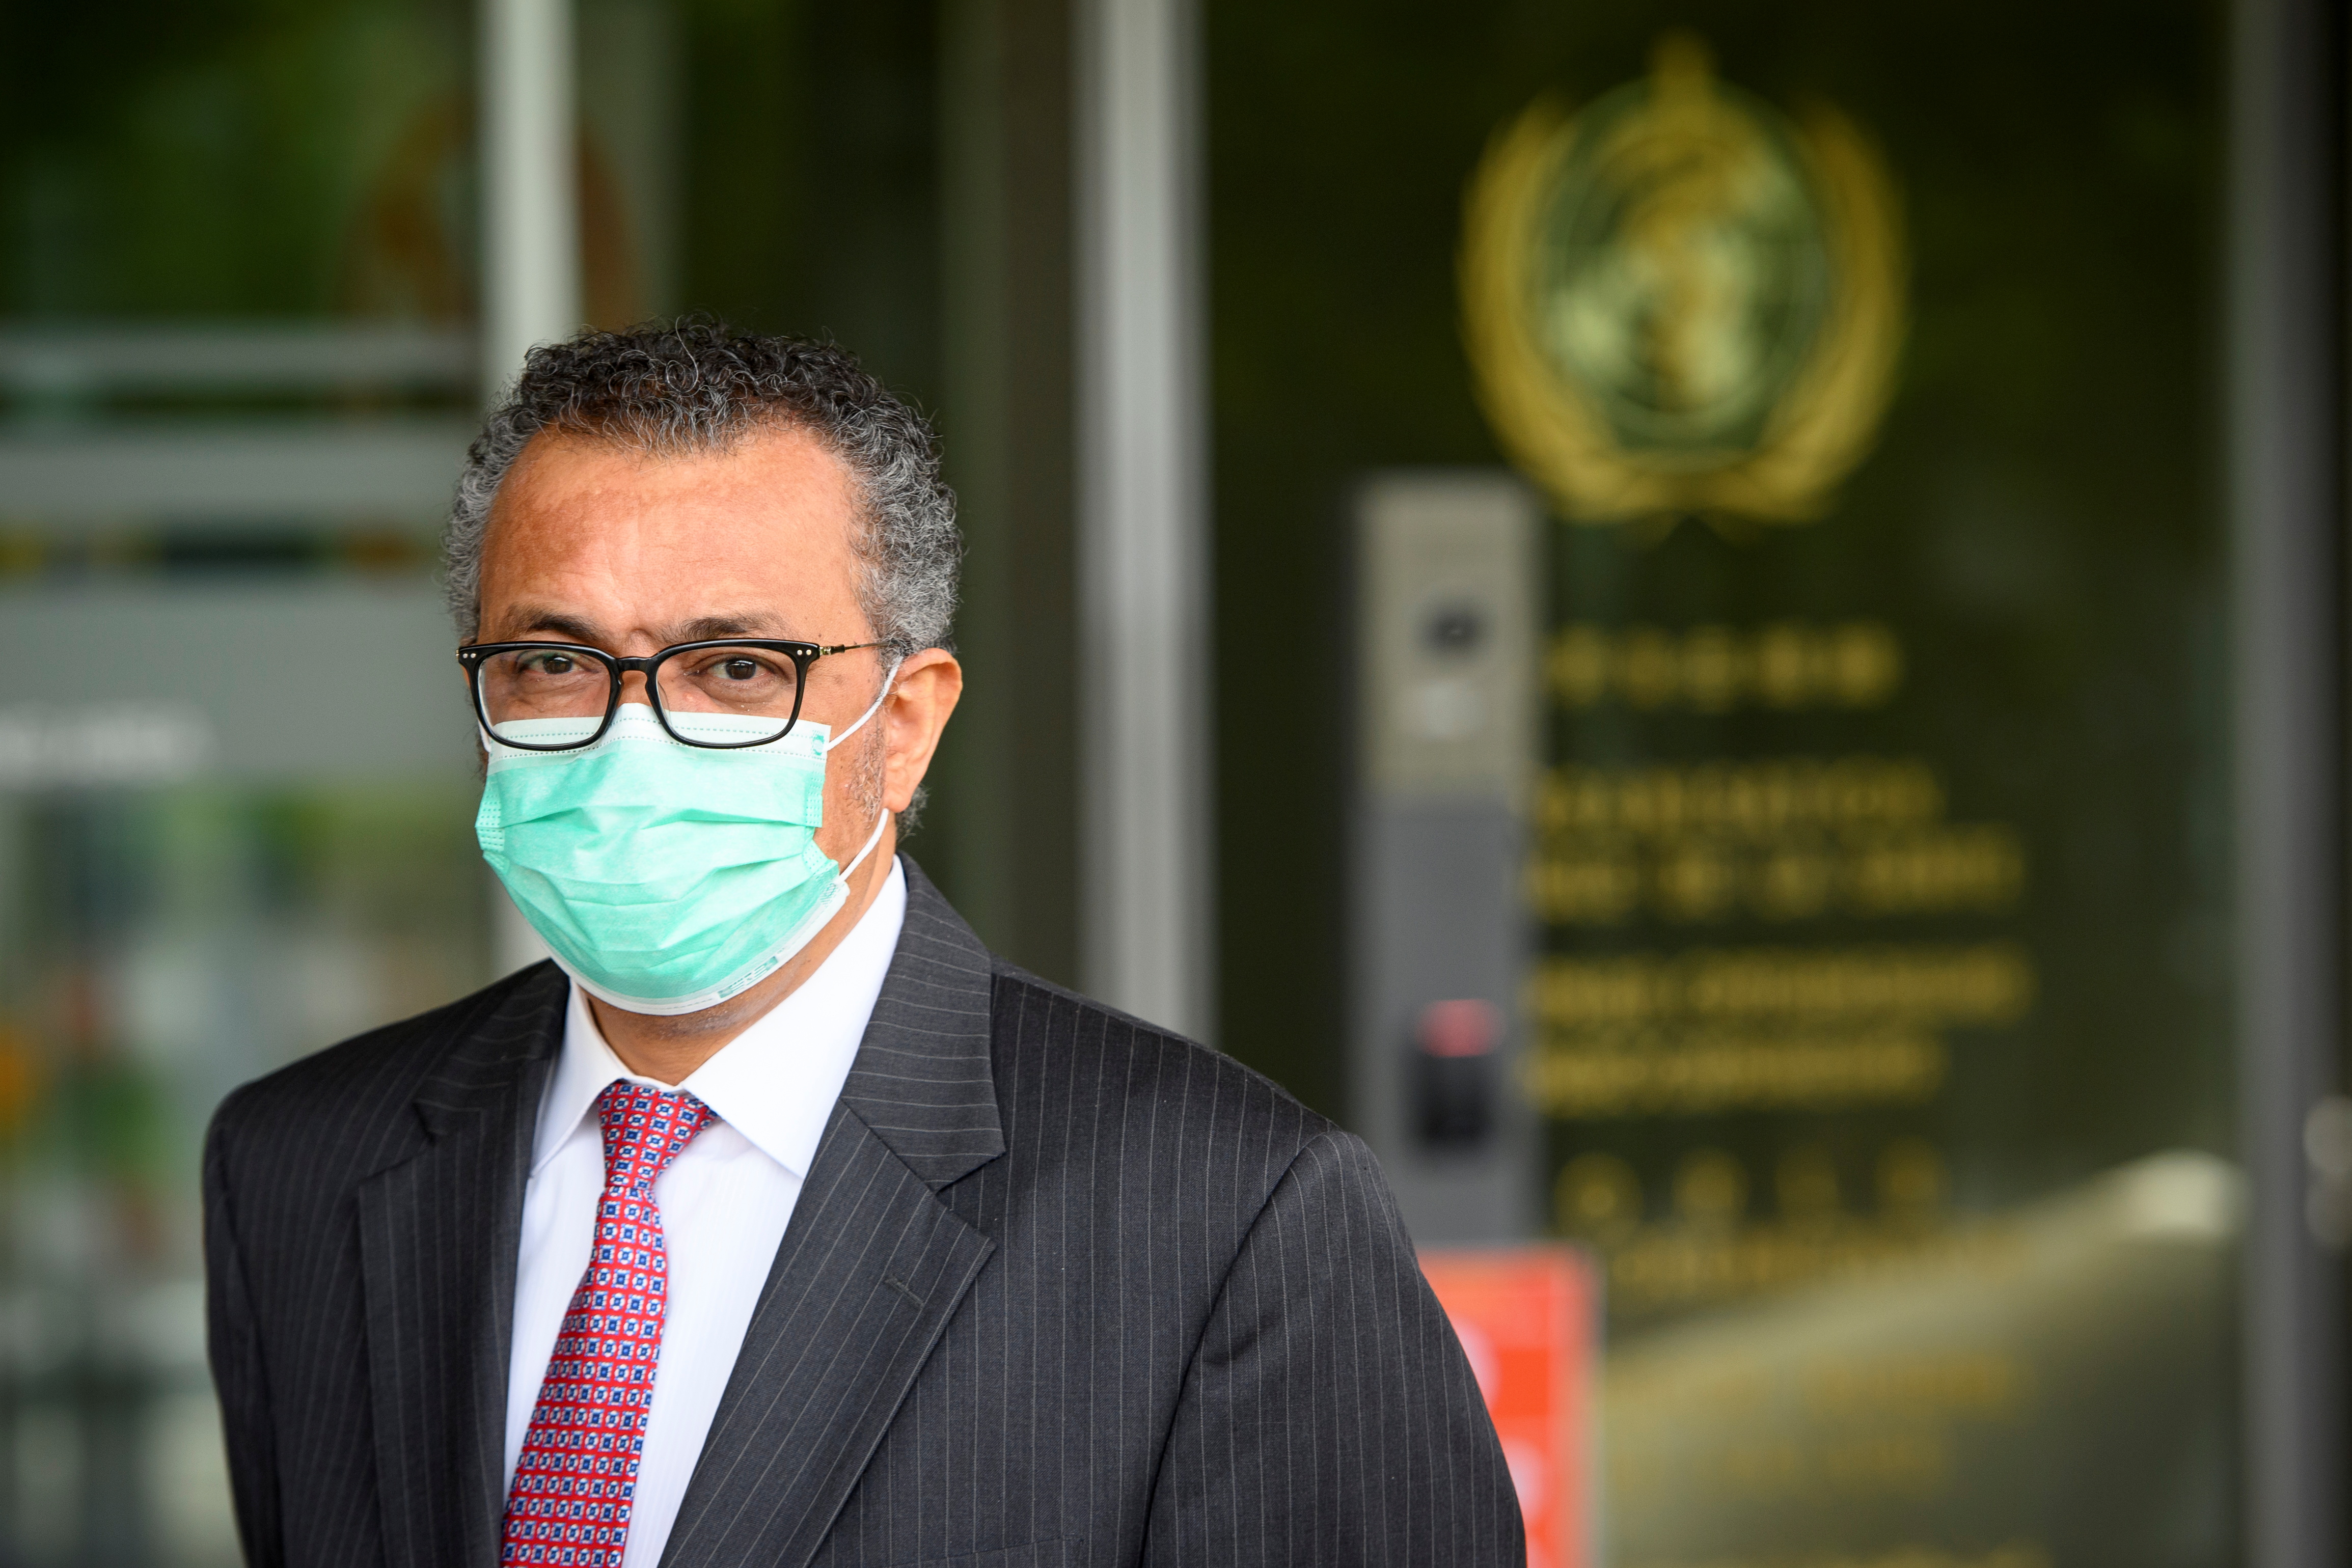 World Health Organization (WHO) Director General Tedros Adhanom Ghebreyesus waits for the arrival of Swiss Interior and Health Minister Alain Berset before a bilateral meeting on the sidelines of the opening of the 74th World Health Assembly at the WHO headquarters, in Geneva, Switzerland May 24, 2021. Laurent Gillieron/Pool via REUTERS